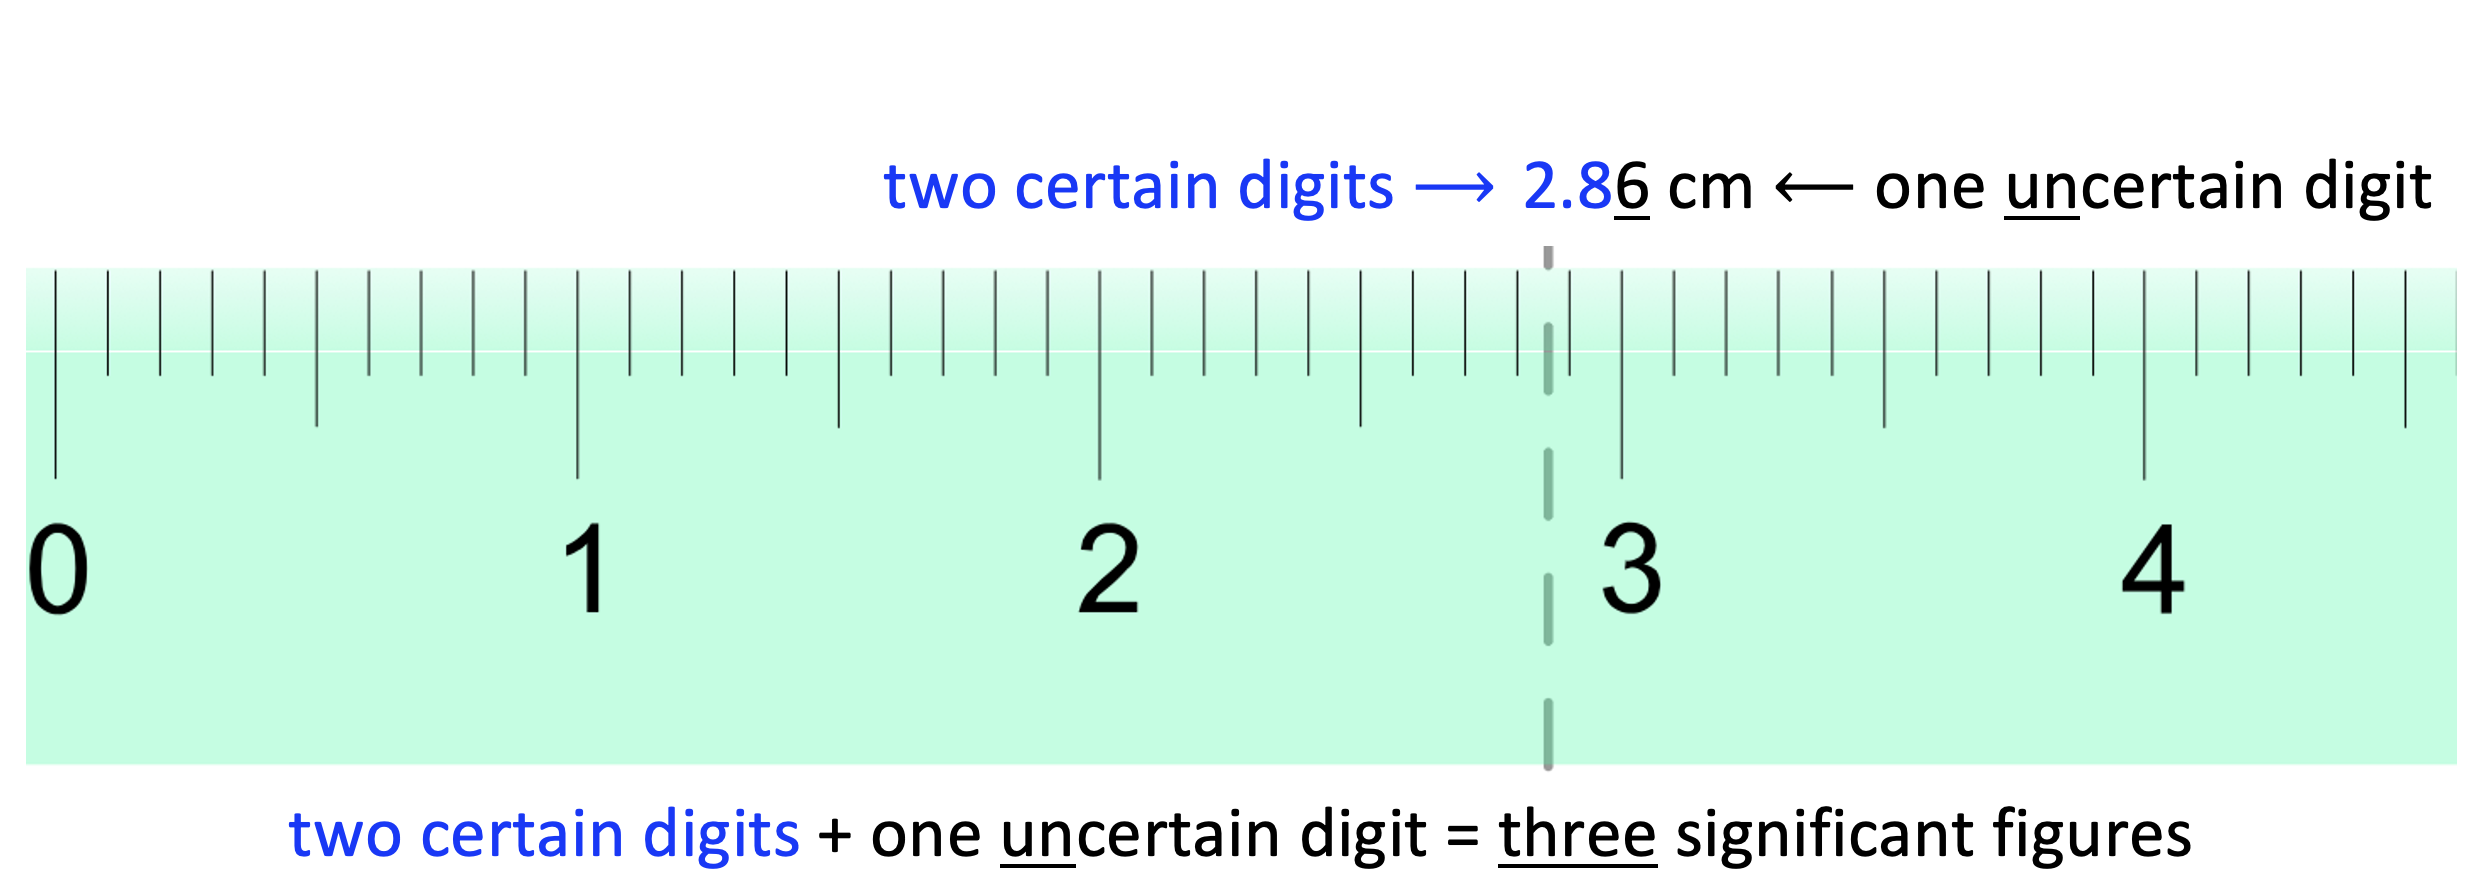 Ruler showing that two certain digits plus one uncertain digit equals three significant figures.